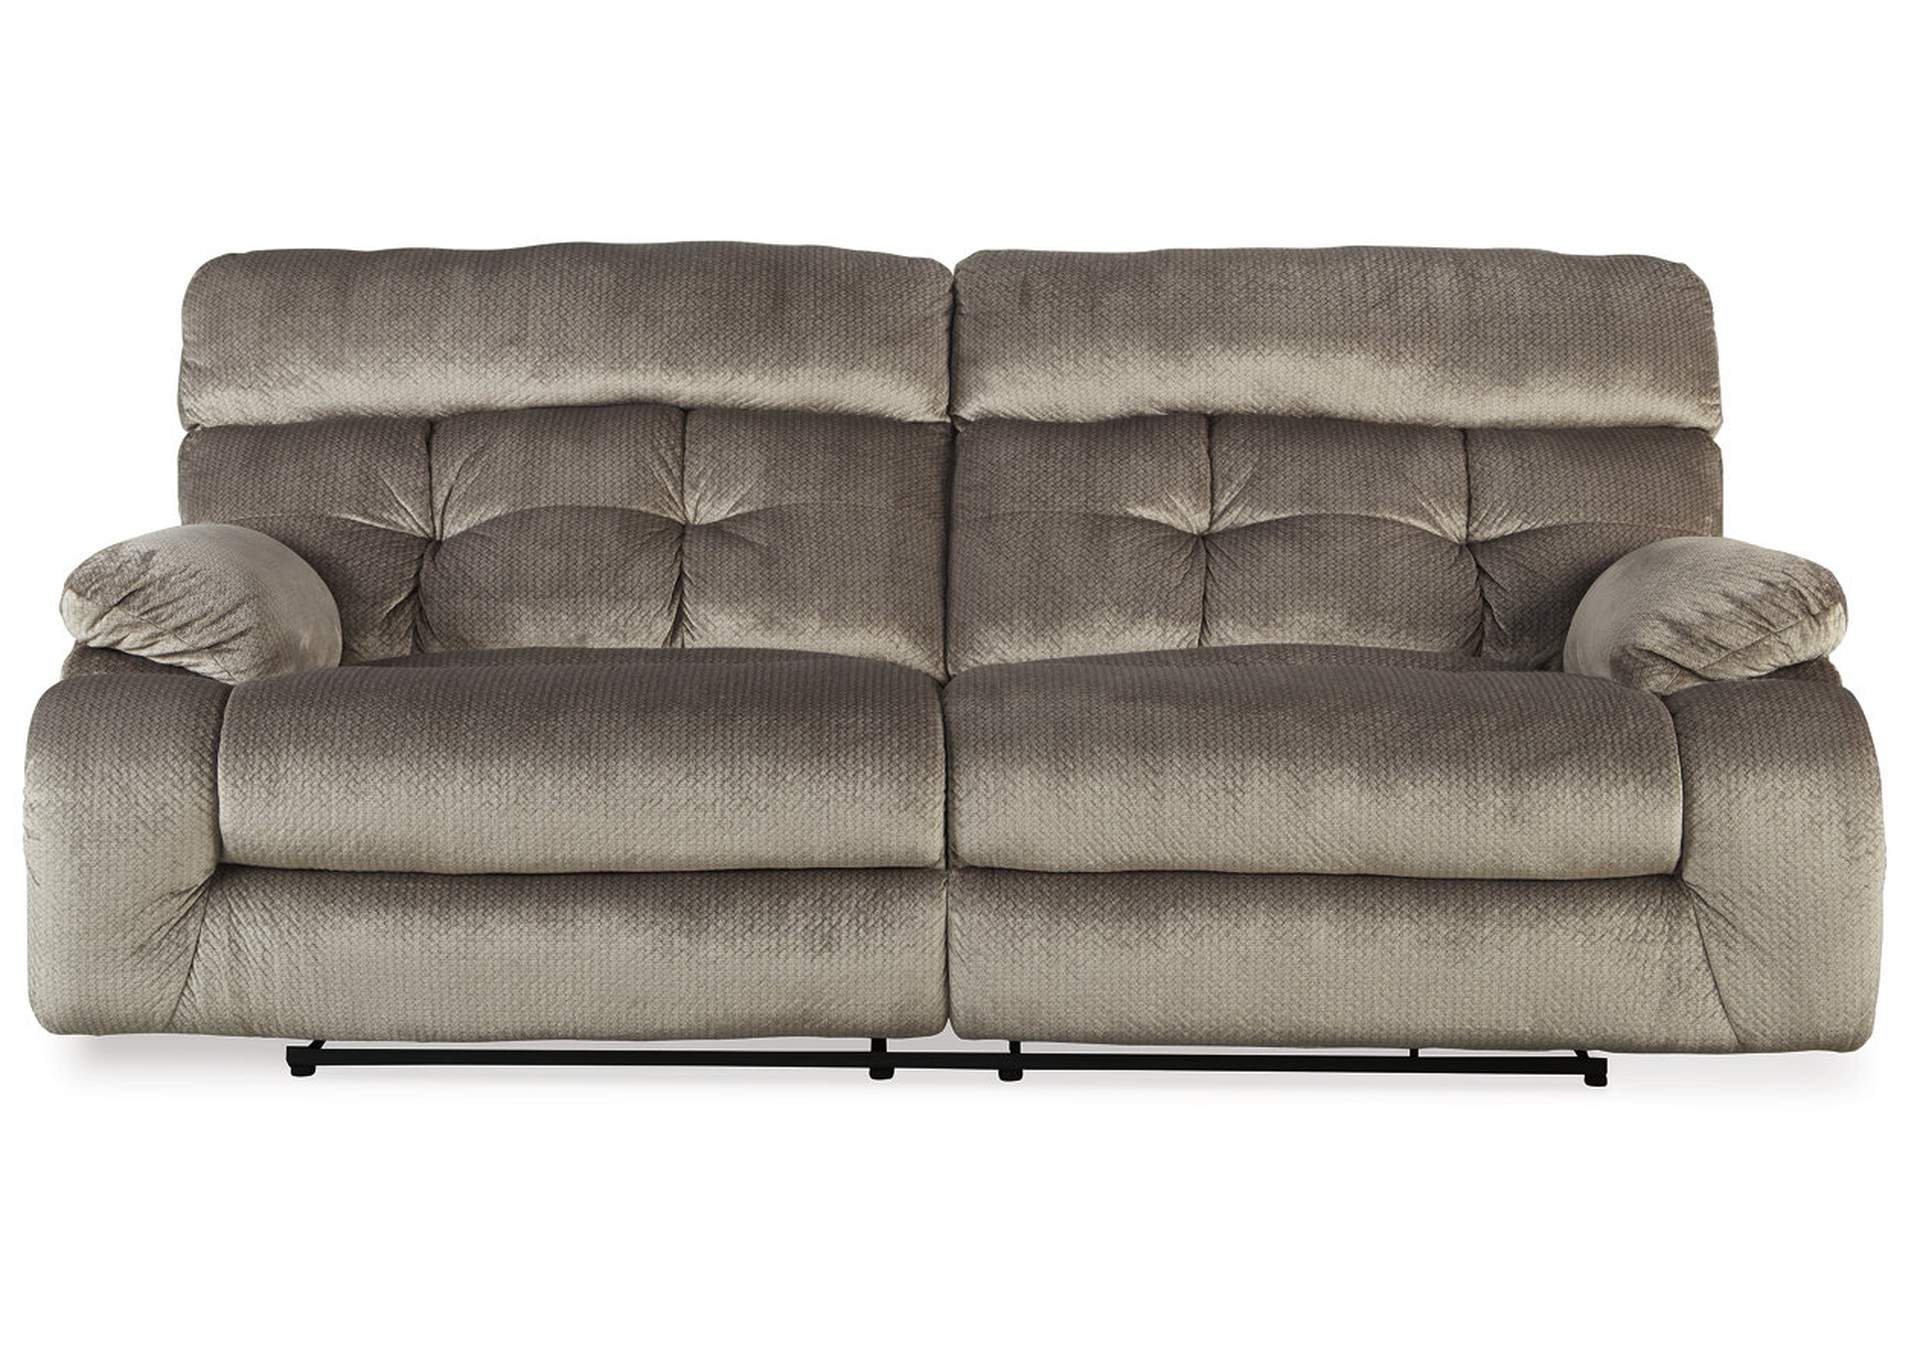 Sofá reclinable Brassville de 2 cuerpos color gris piedra PEDIDO ESPECIAL  Ashley Furniture Homestore - Independently Owned and Operated by Empresas  Berrios